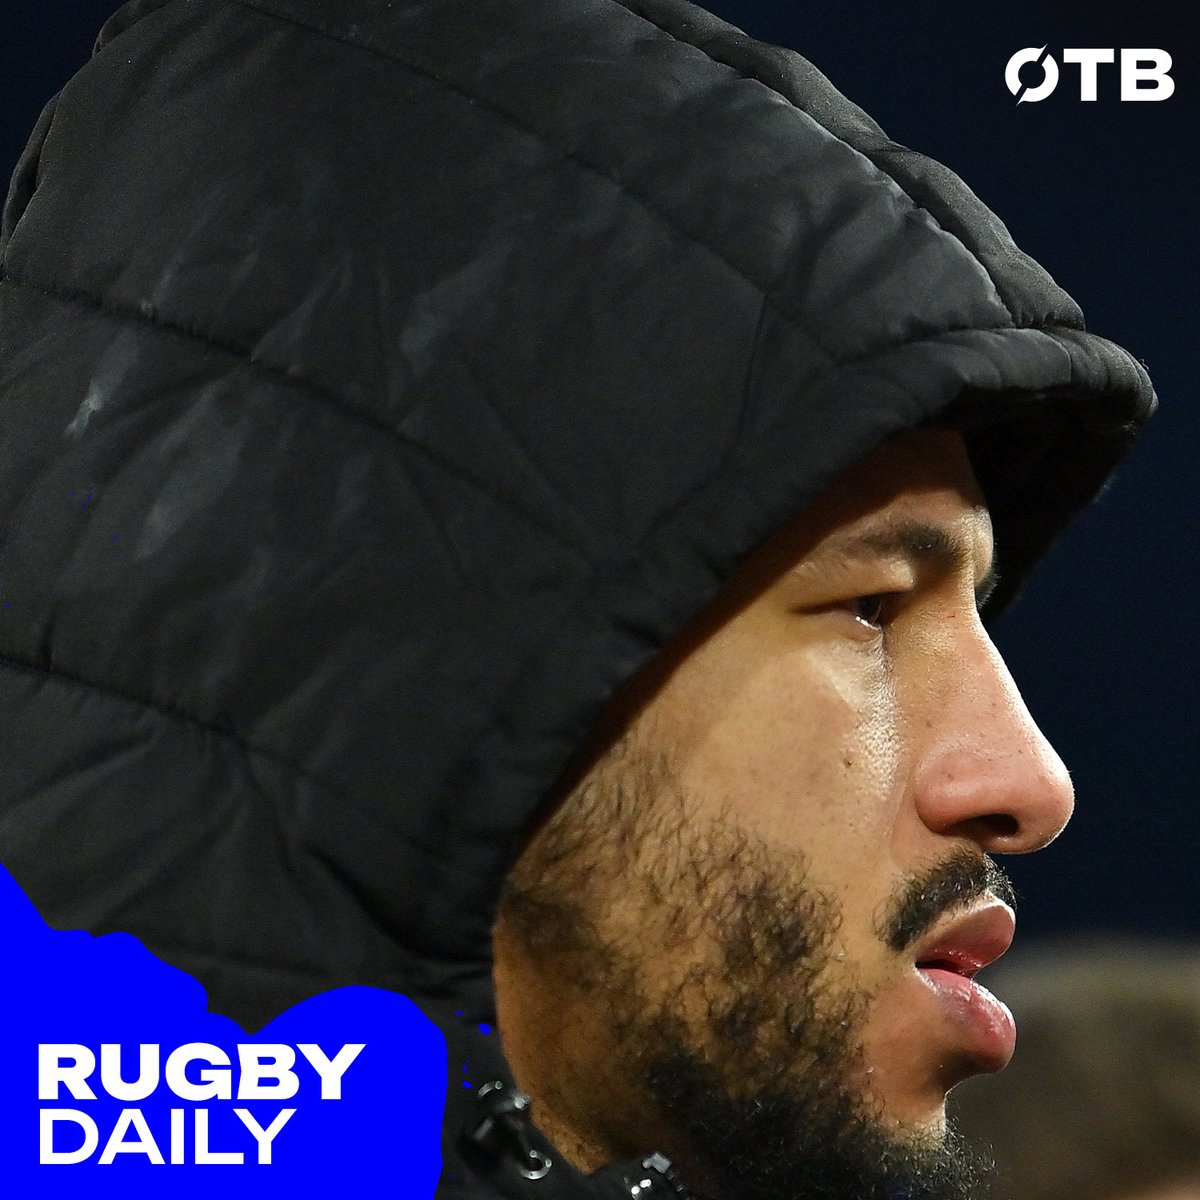 RUGBY DAILY 🏉

- We hear from Northampton's Courtney Lawes on the significance of Croke Park.
- Ireland will warm up for their WXV1 campaign with a test against the Wallaroos in Belfast.

LINK 👇
open.spotify.com/episode/0umulo…